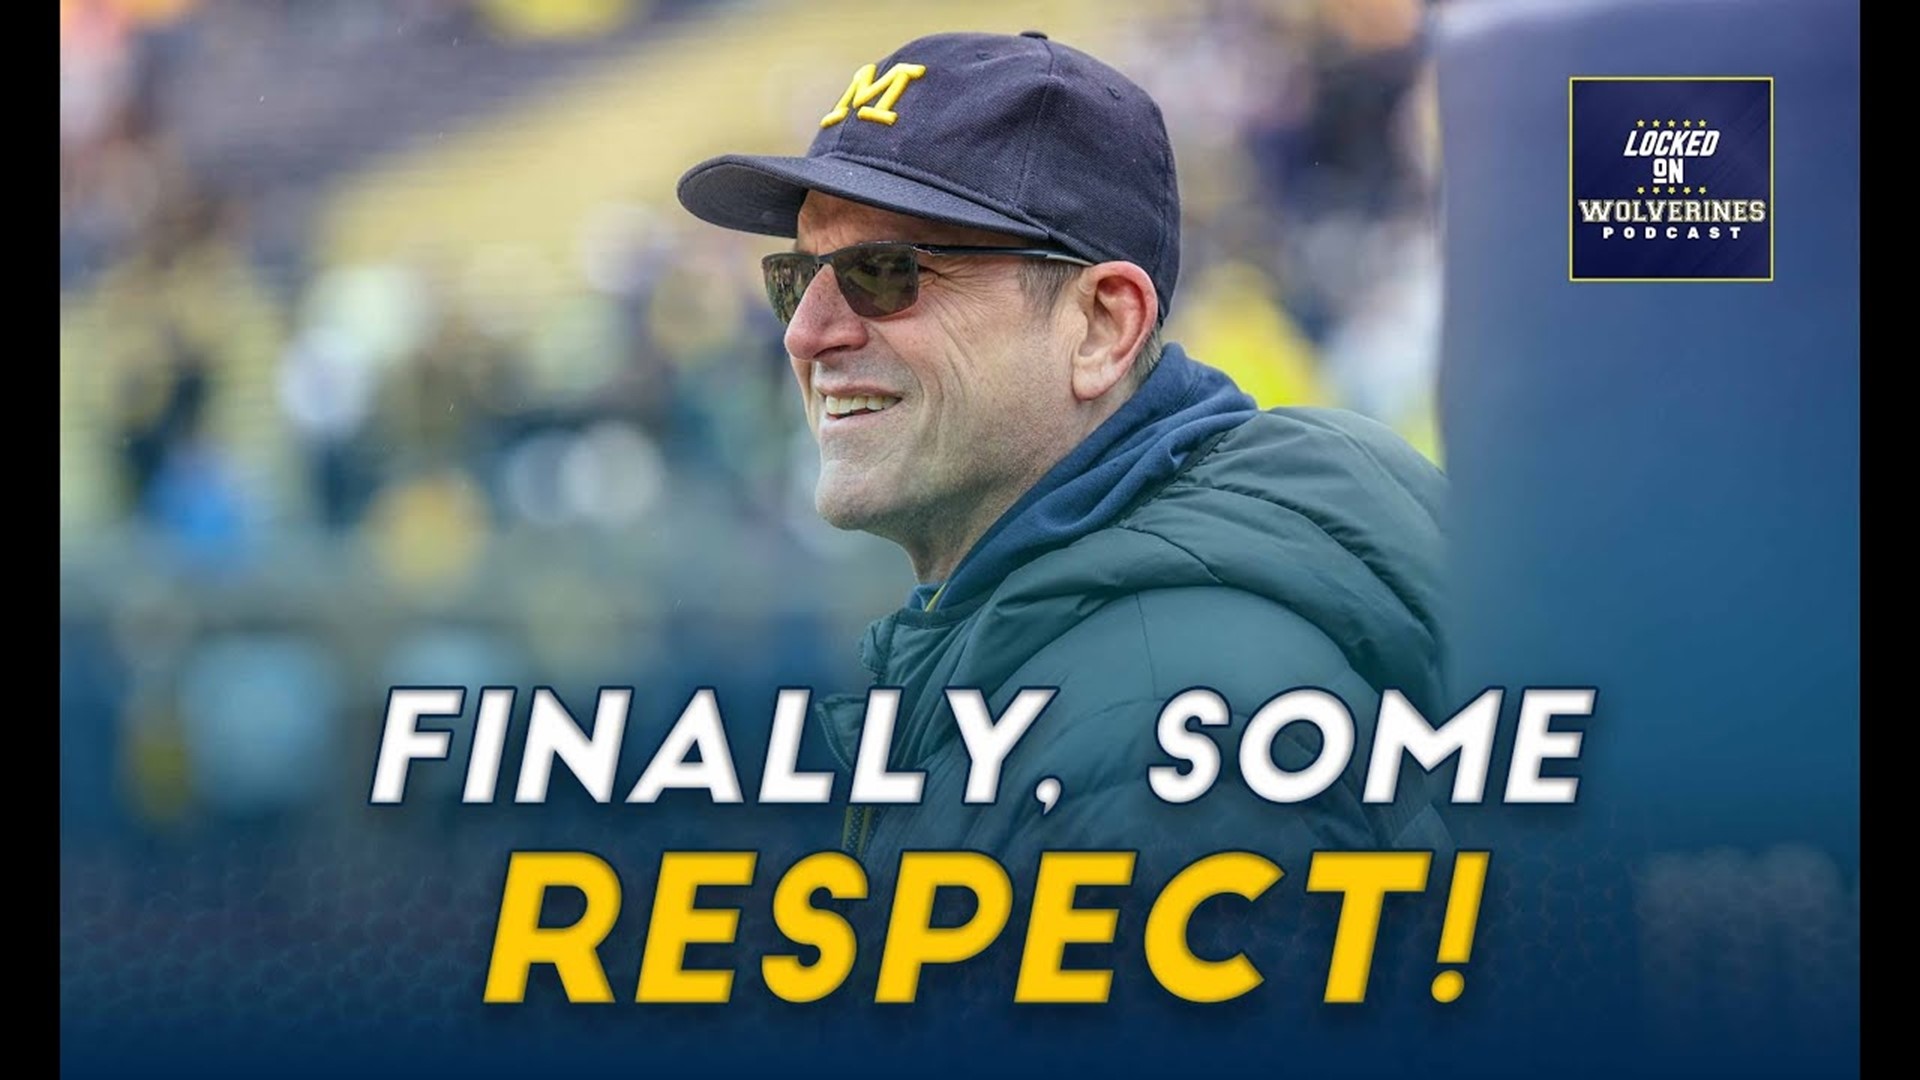 Jim Harbaugh continues his offseason redemption tour, making yet another top 25 coaches in college football list among the upper, upper echelon of those in the sport